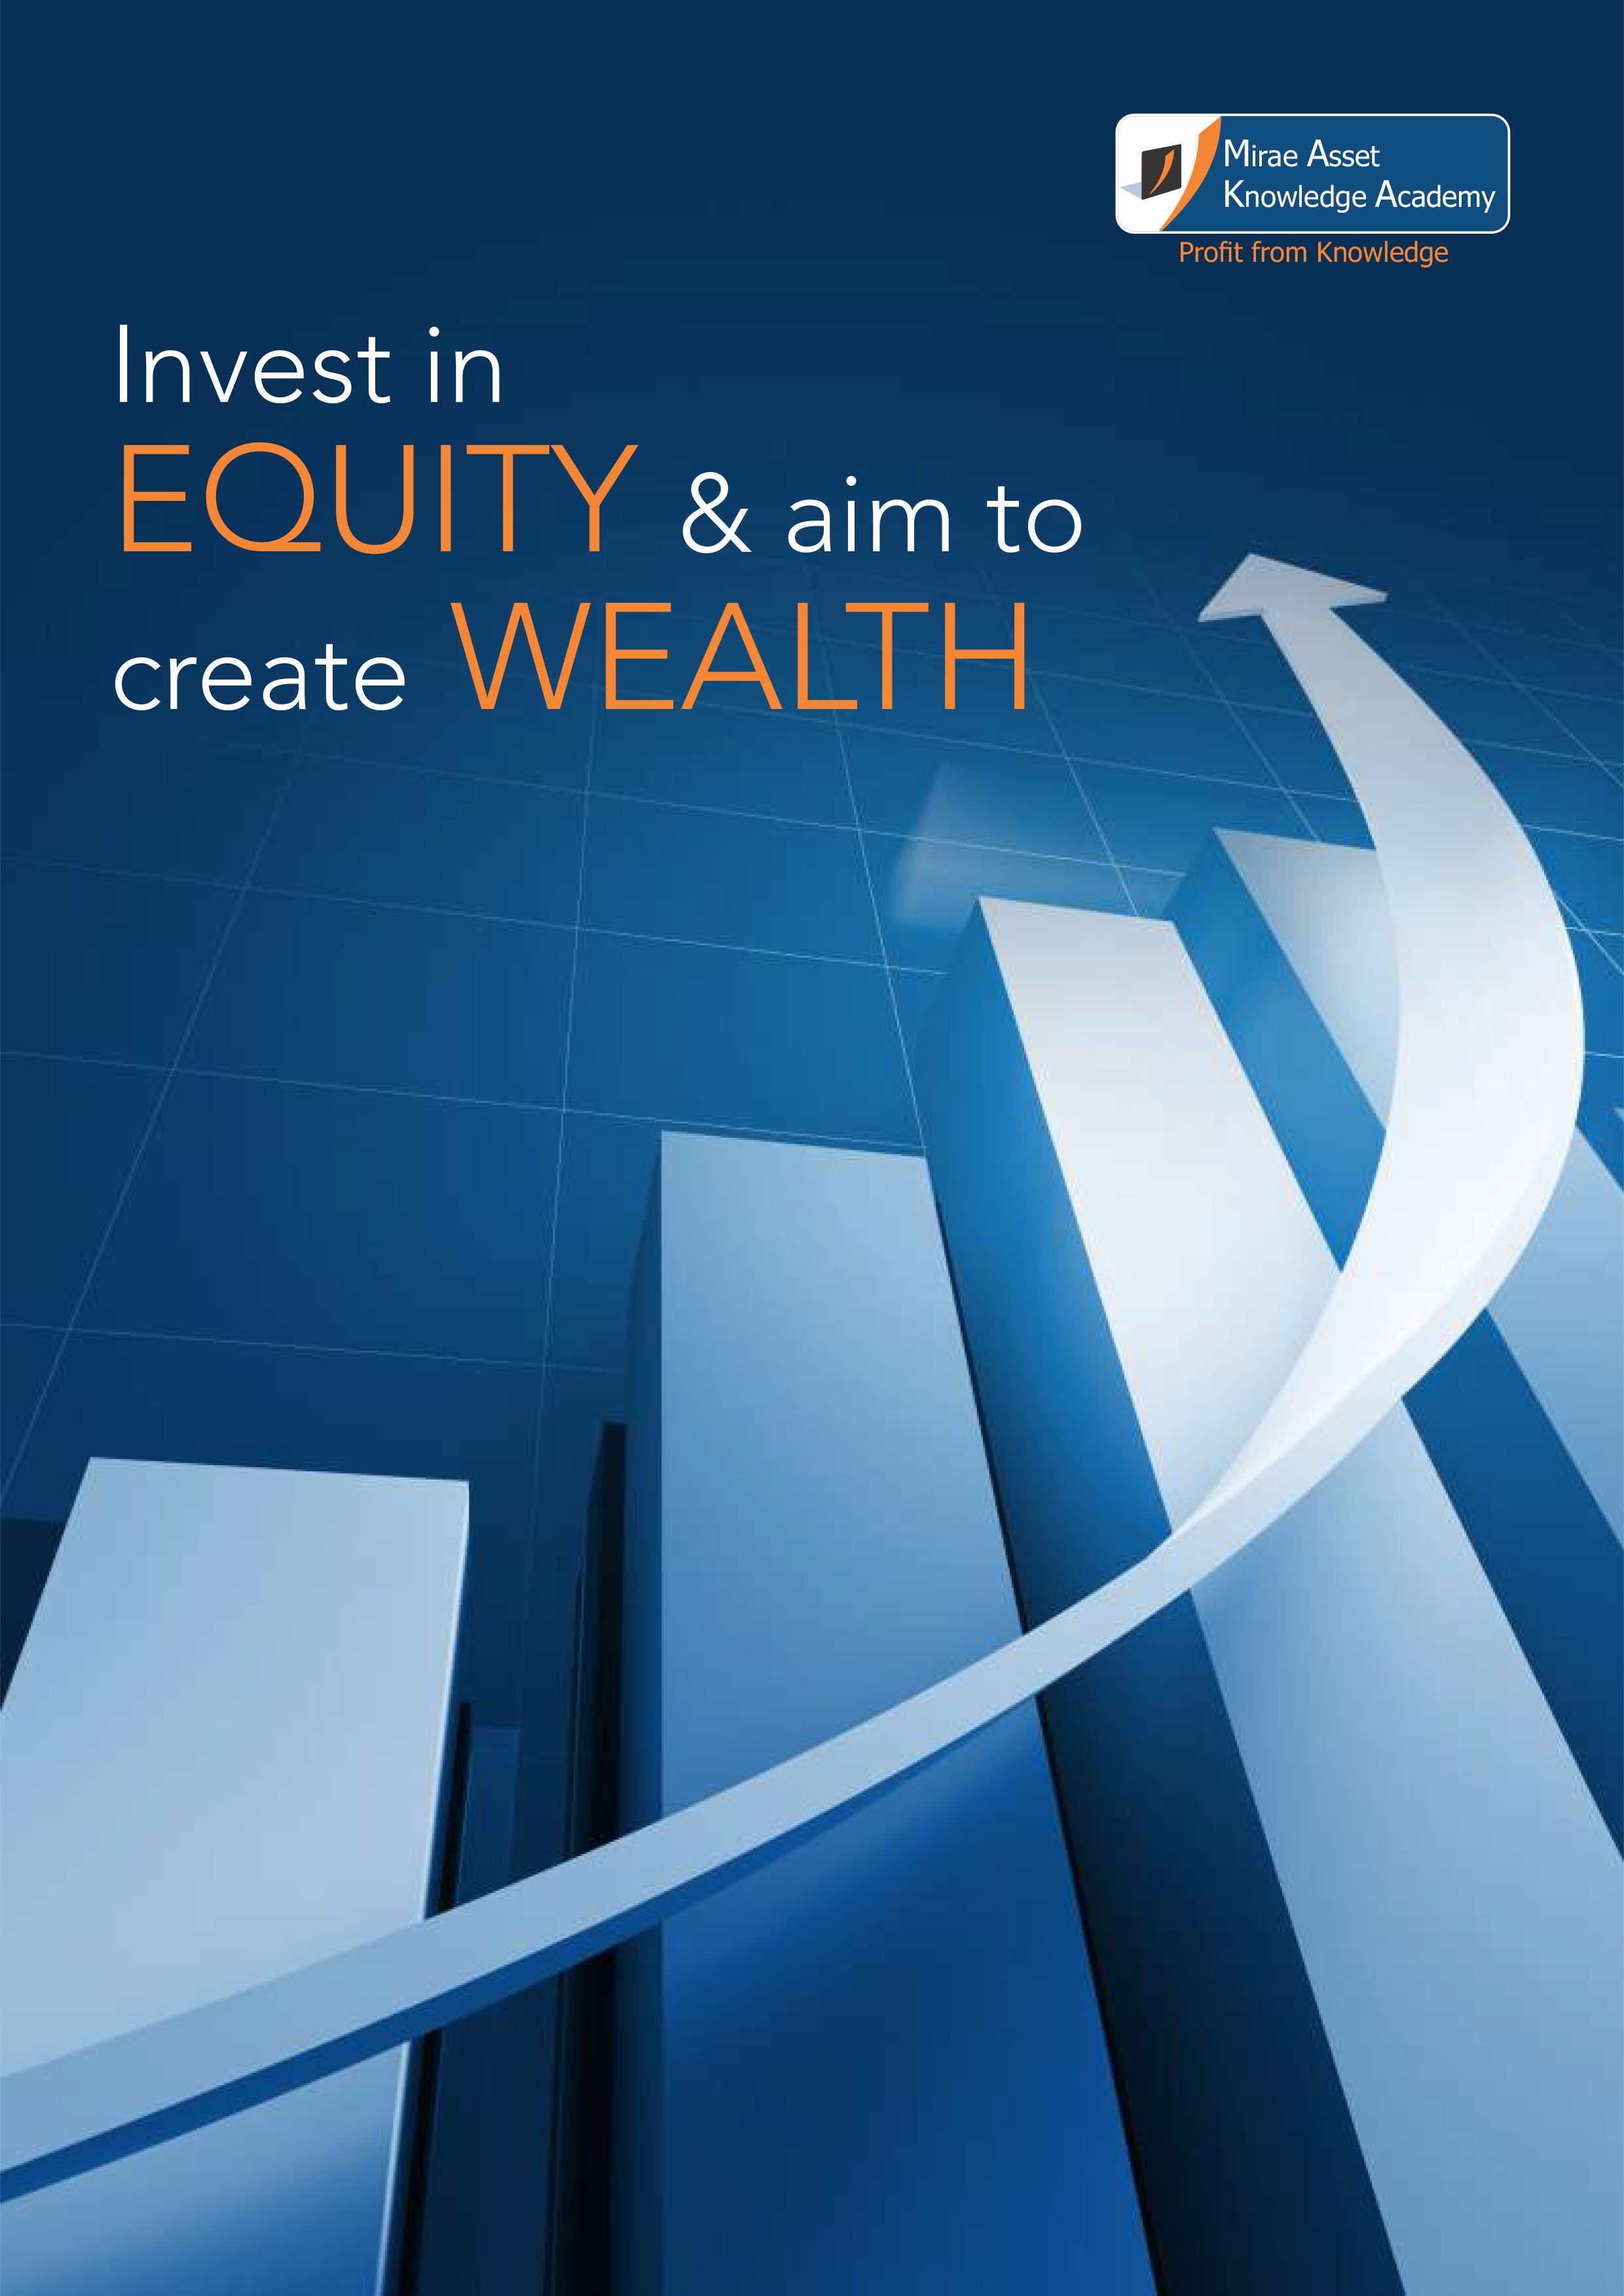 “Mirae Asset Knowledge Academy : Invest in Equity to create Wealth ...